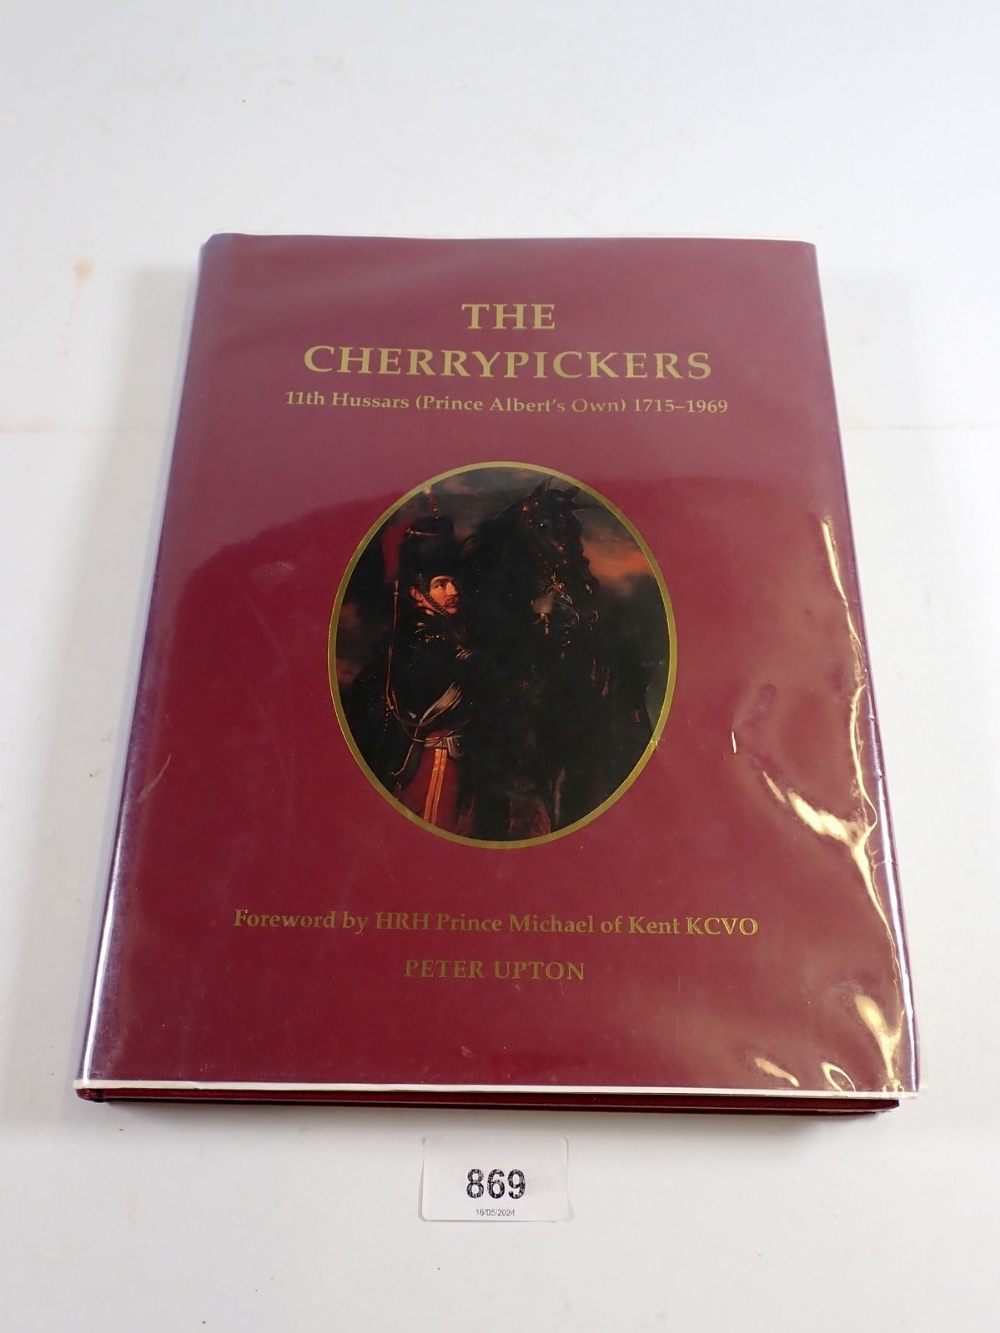 The Cherrypickers, 11th Hussars (Prince Albert's Own) 1715-1969 by Peter Upton, flat signed by